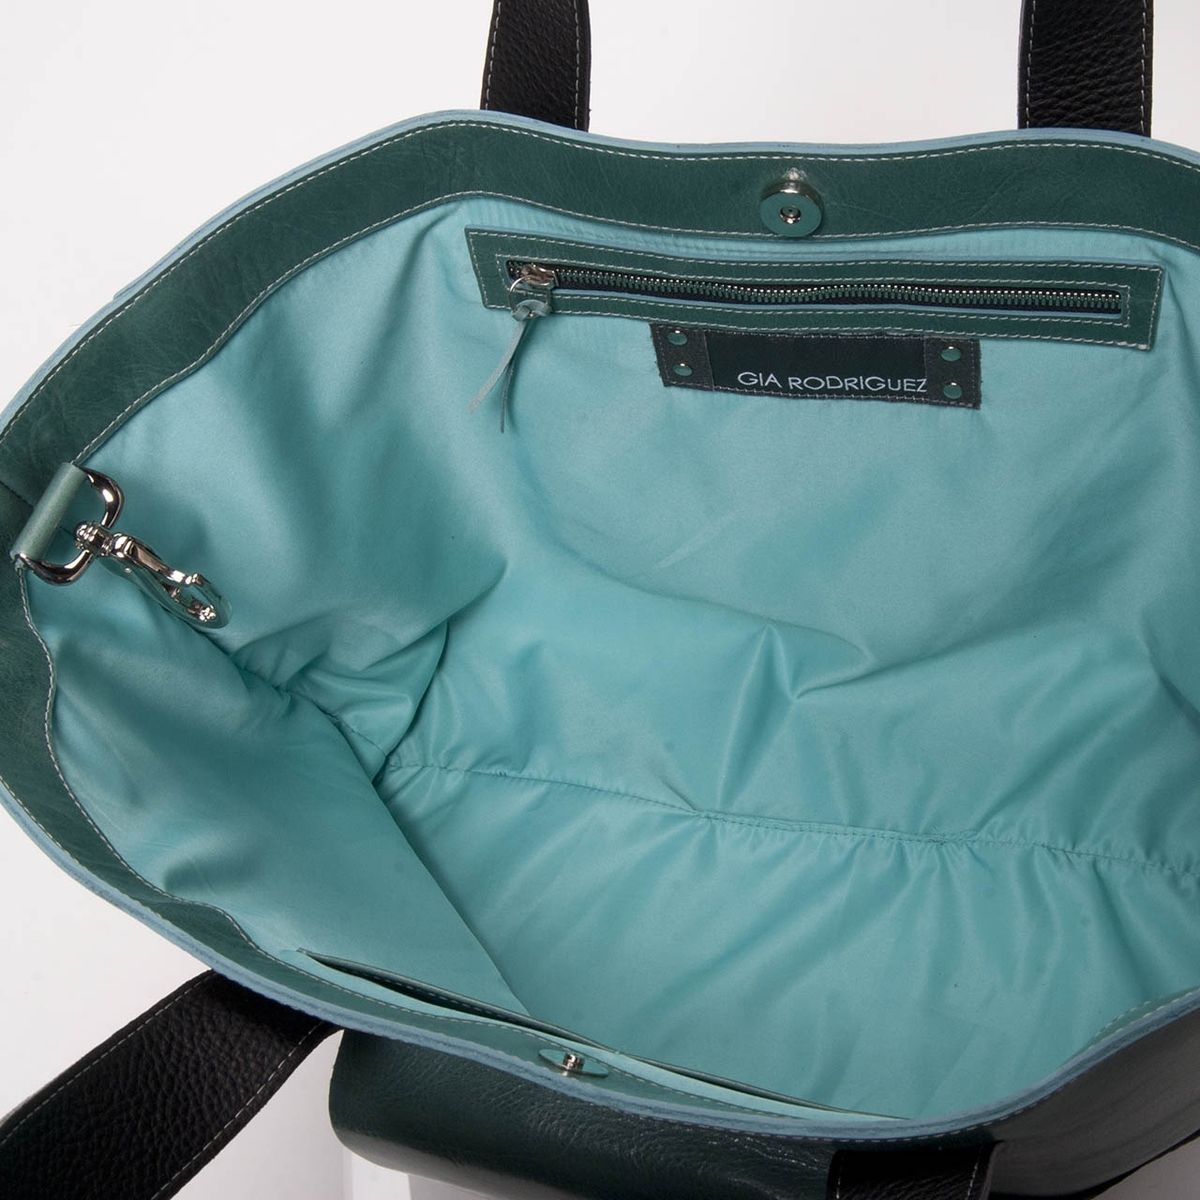 Hand Crafted Leather Tote Bag - Fully Lined: Turquoise Blue And Black ...